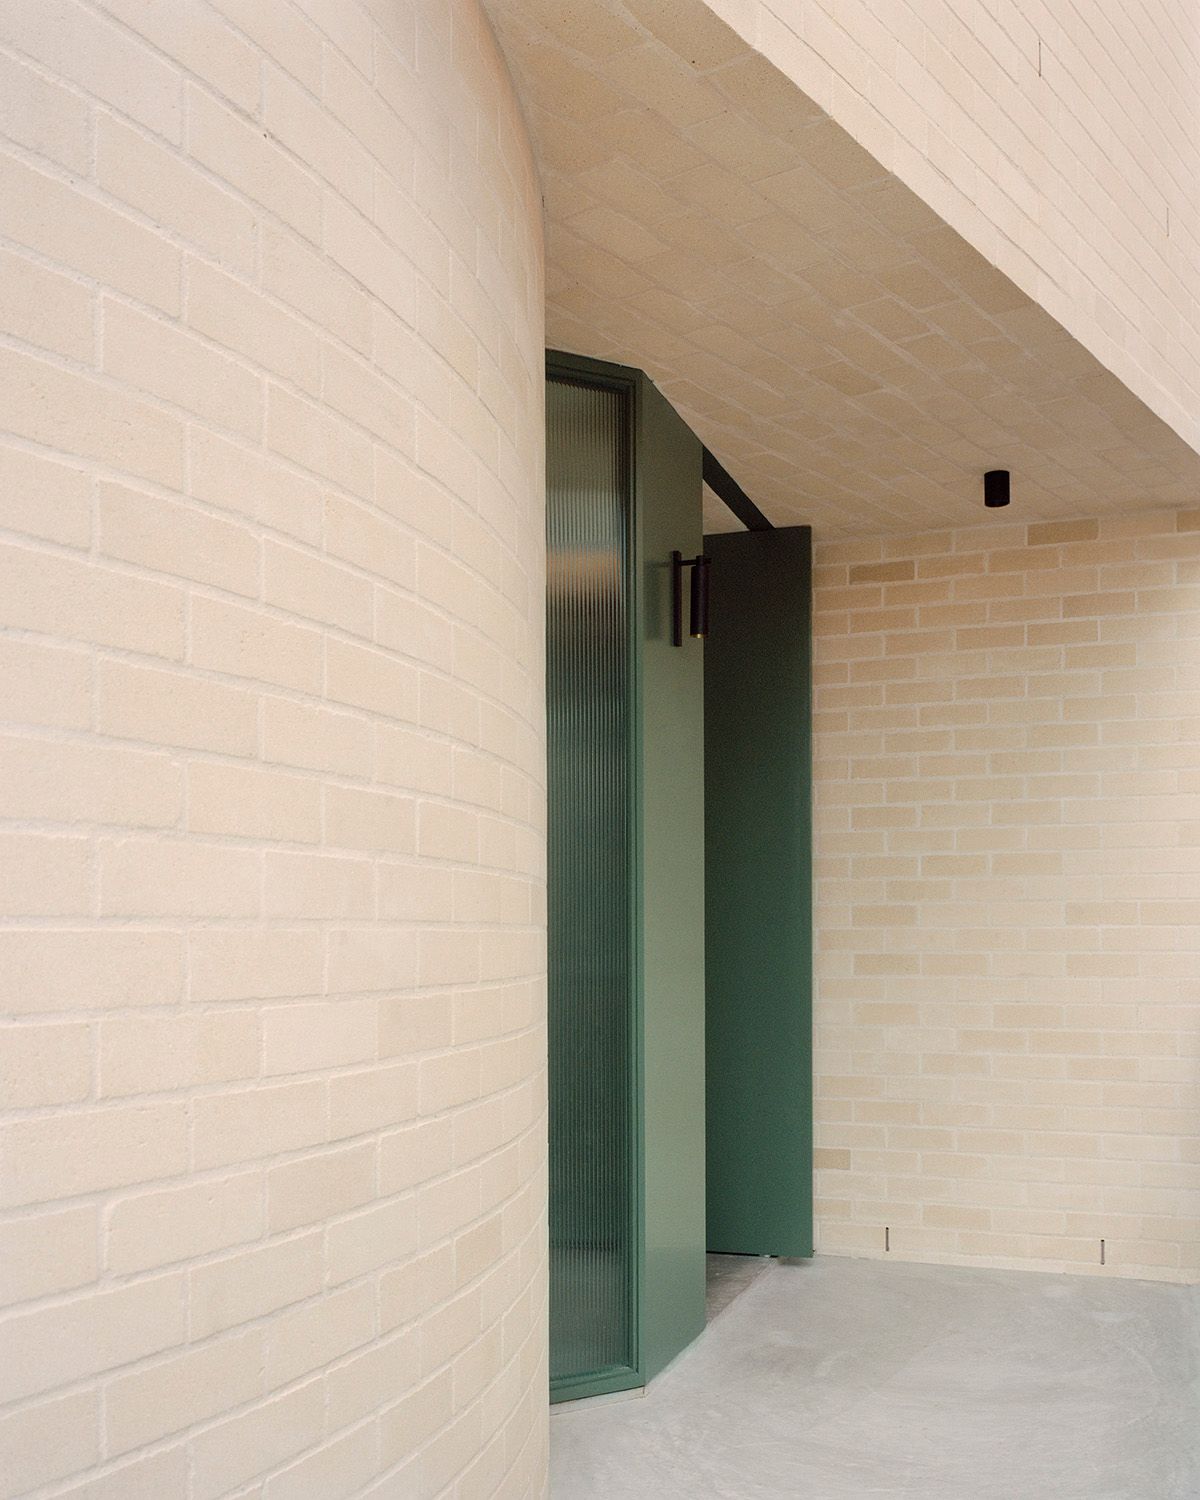 Bronte House by Tribe Studio Architects showing green front entry door up against the cream brickwork